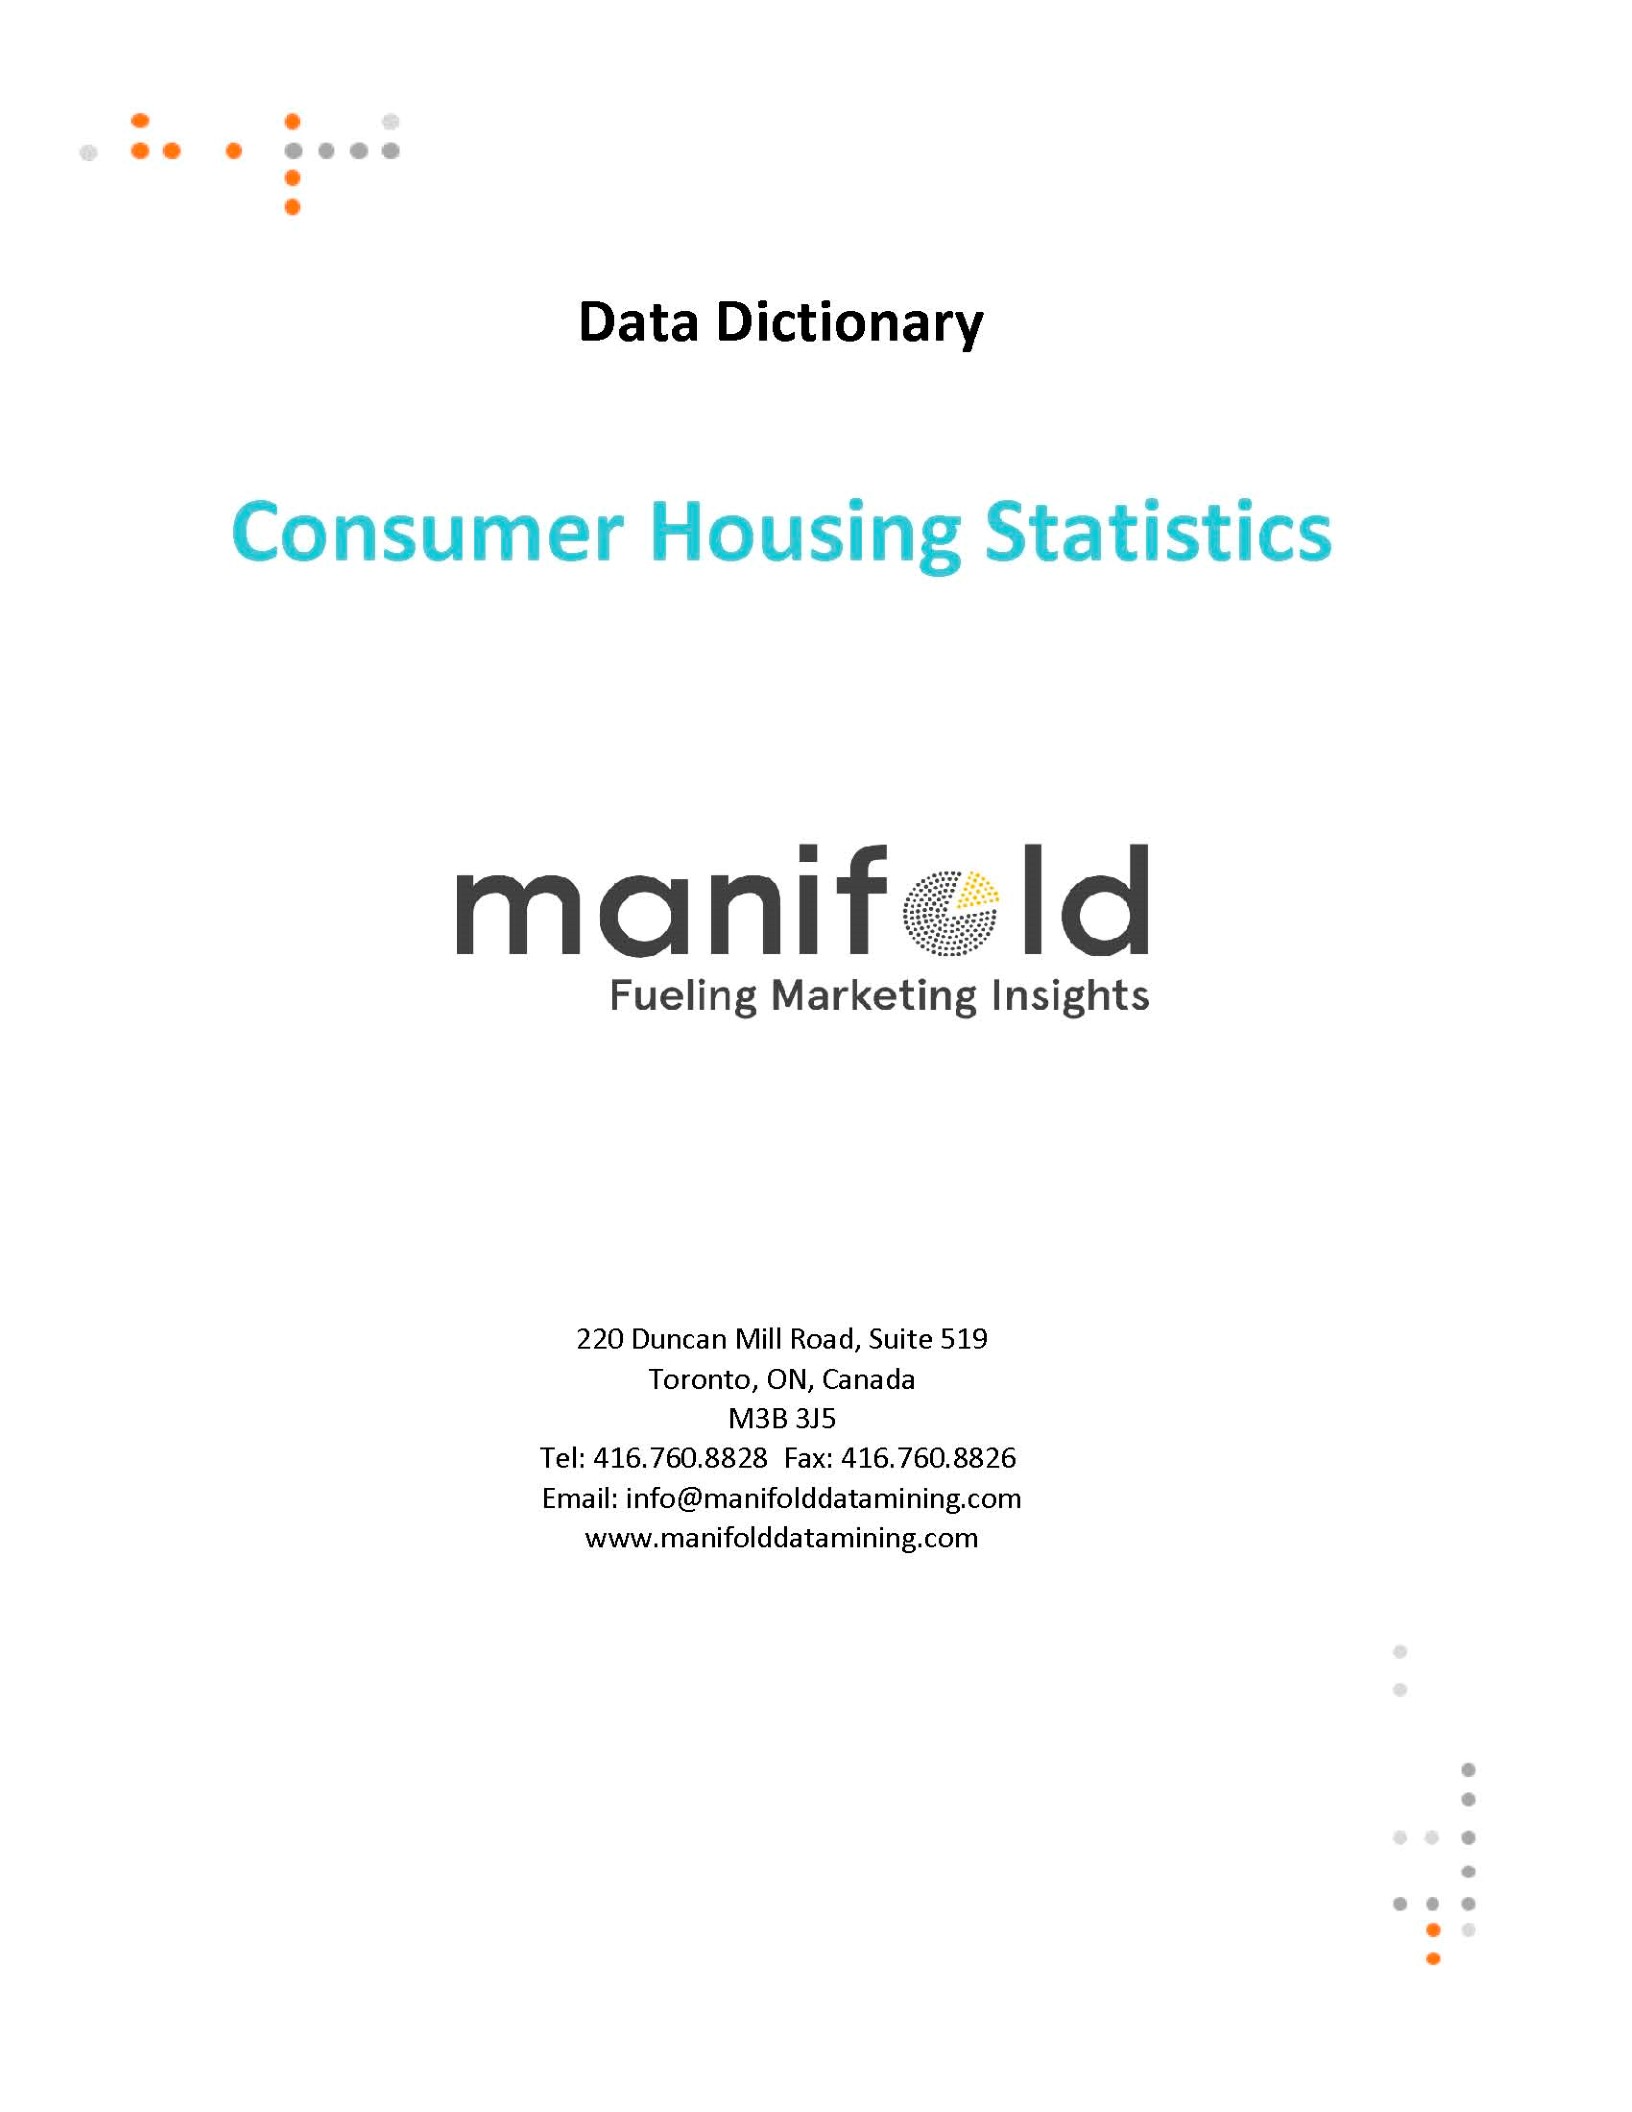 Data Dictionary of Consumer Housing Statistics_Page_01